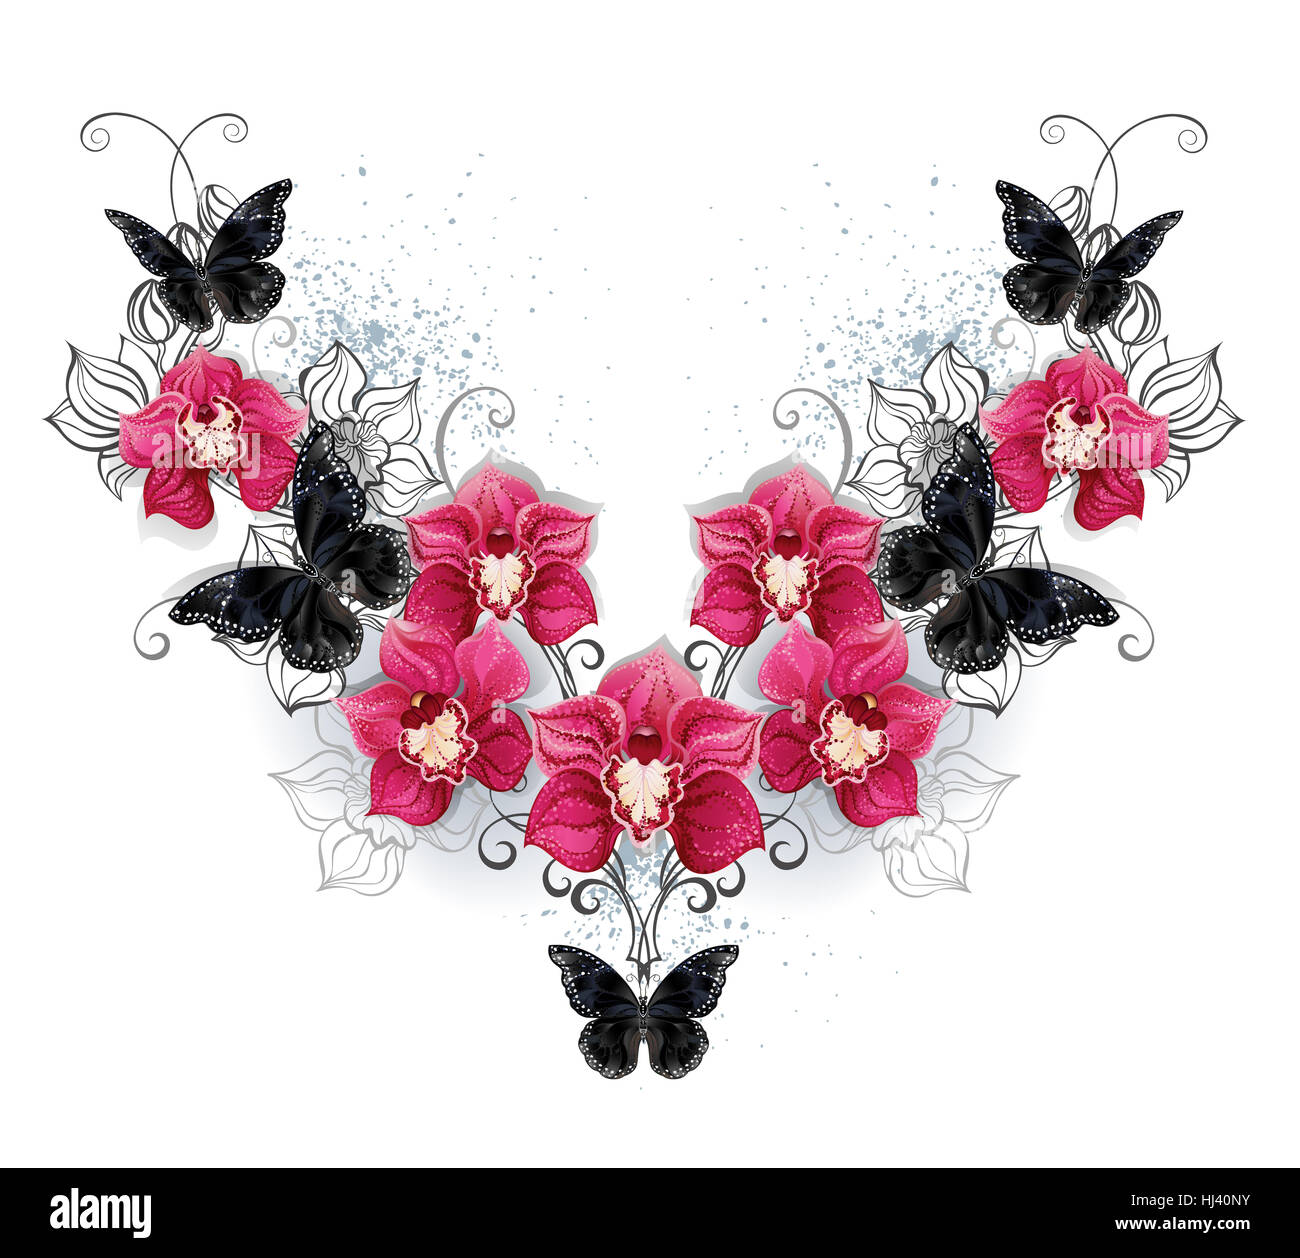 Symmetric pattern of black butterflies and pink orchids on a white background. Design with orchids. Black butterfly Stock Photo